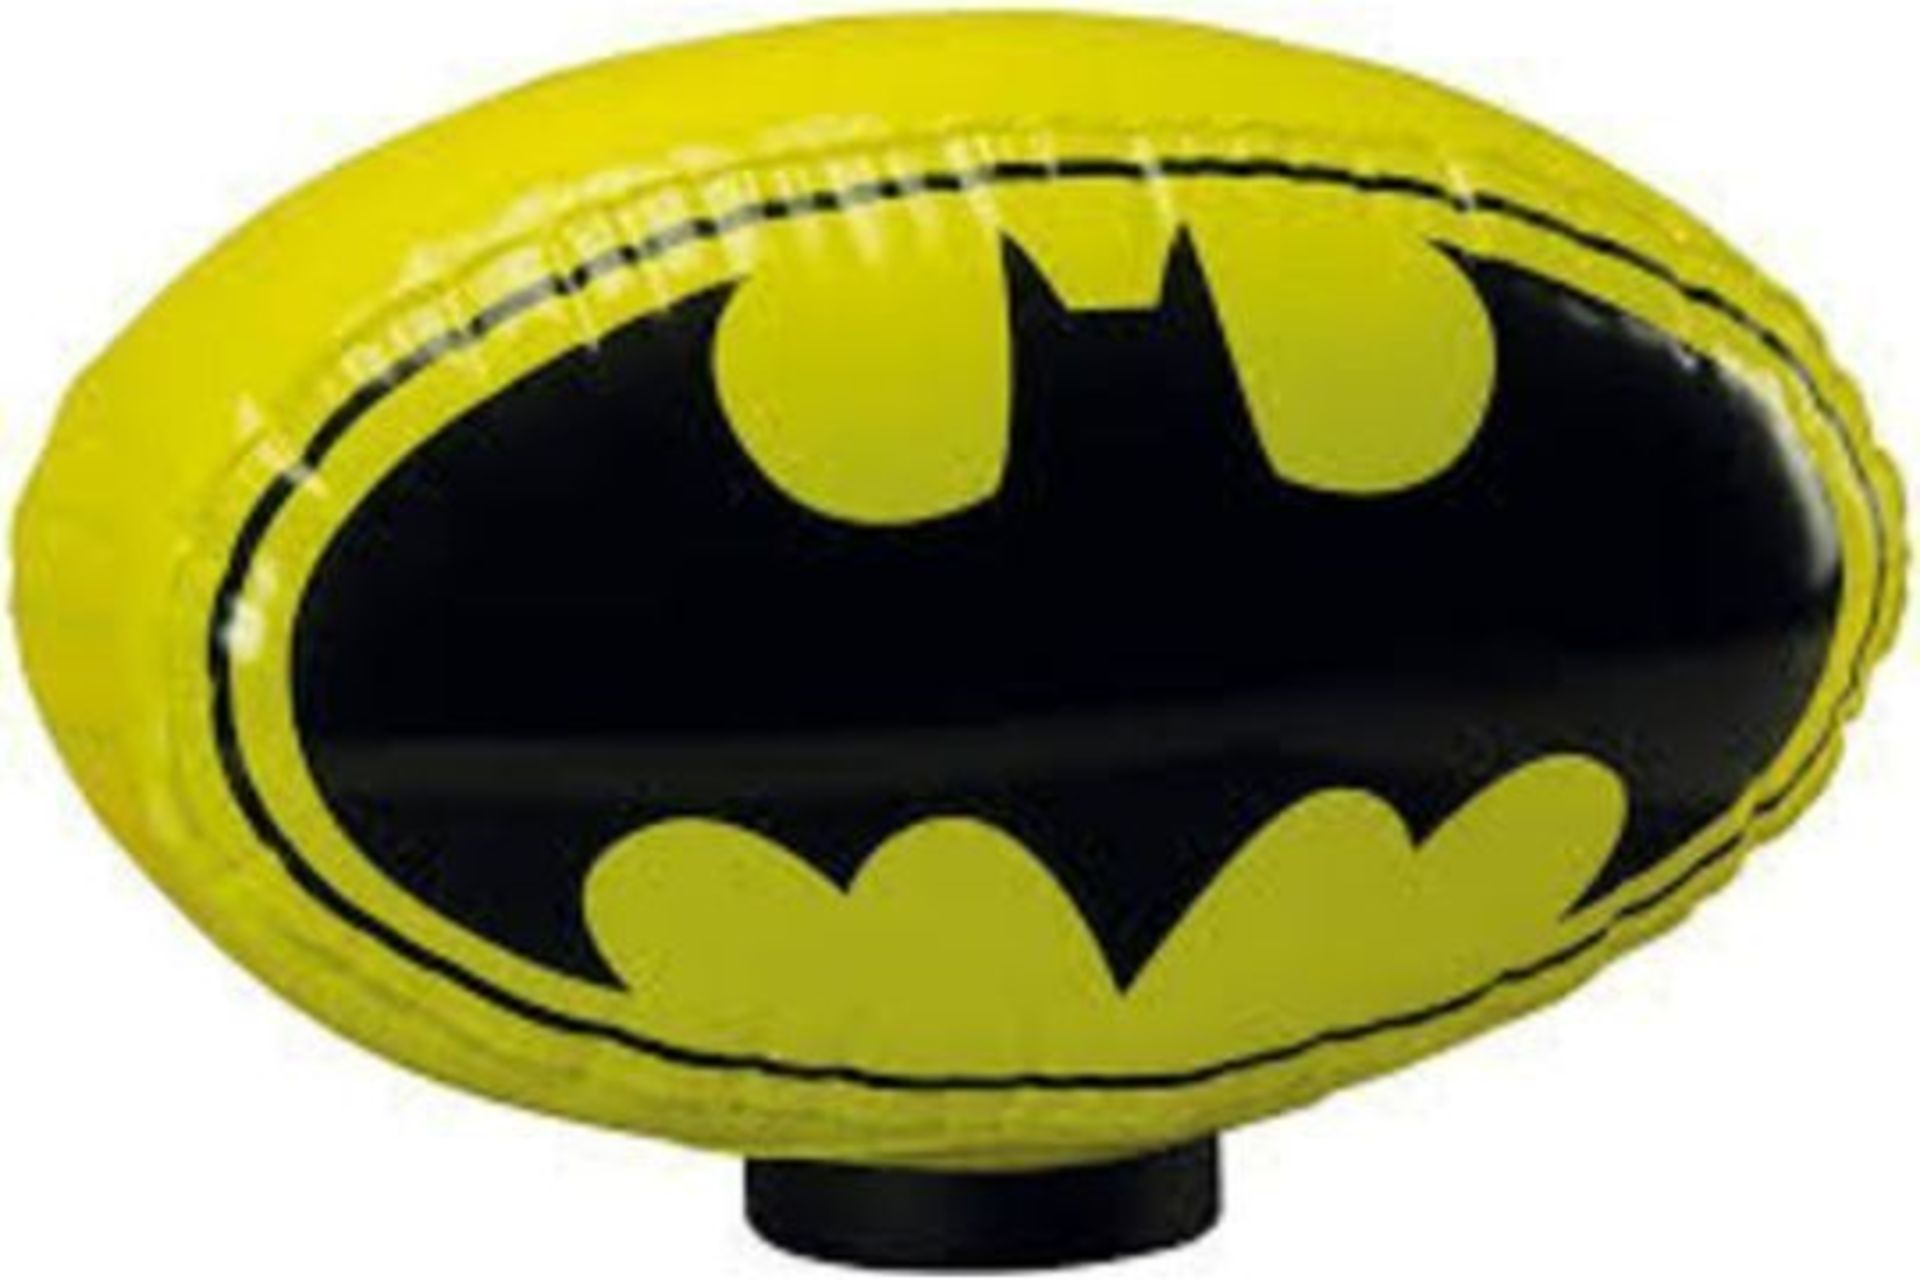 BRAND NEW XL BATMAN LOGO INFLATABLE LIGHT LAMP TOUCH ACTIVATED ON/OFF